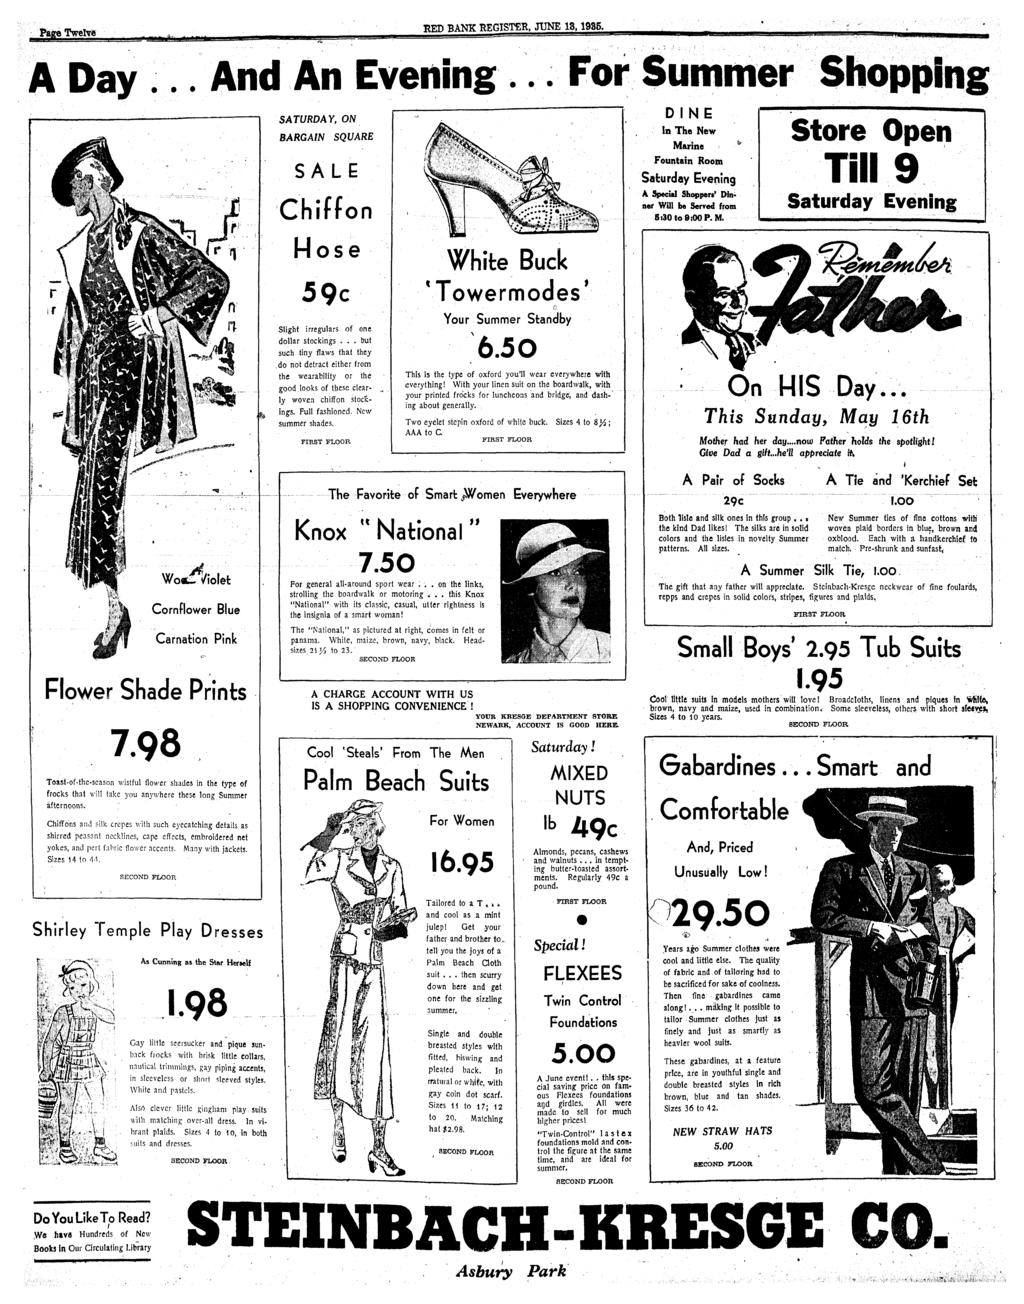 Page Twelve RED BANK REGISTER, JUNE 13, 193S. A Day And An Evening.. For Summer SATURDAY, ON BARGAIN SQUARE SALE Chiffon Hose 59c Slight irregulars of one dollar stockings.